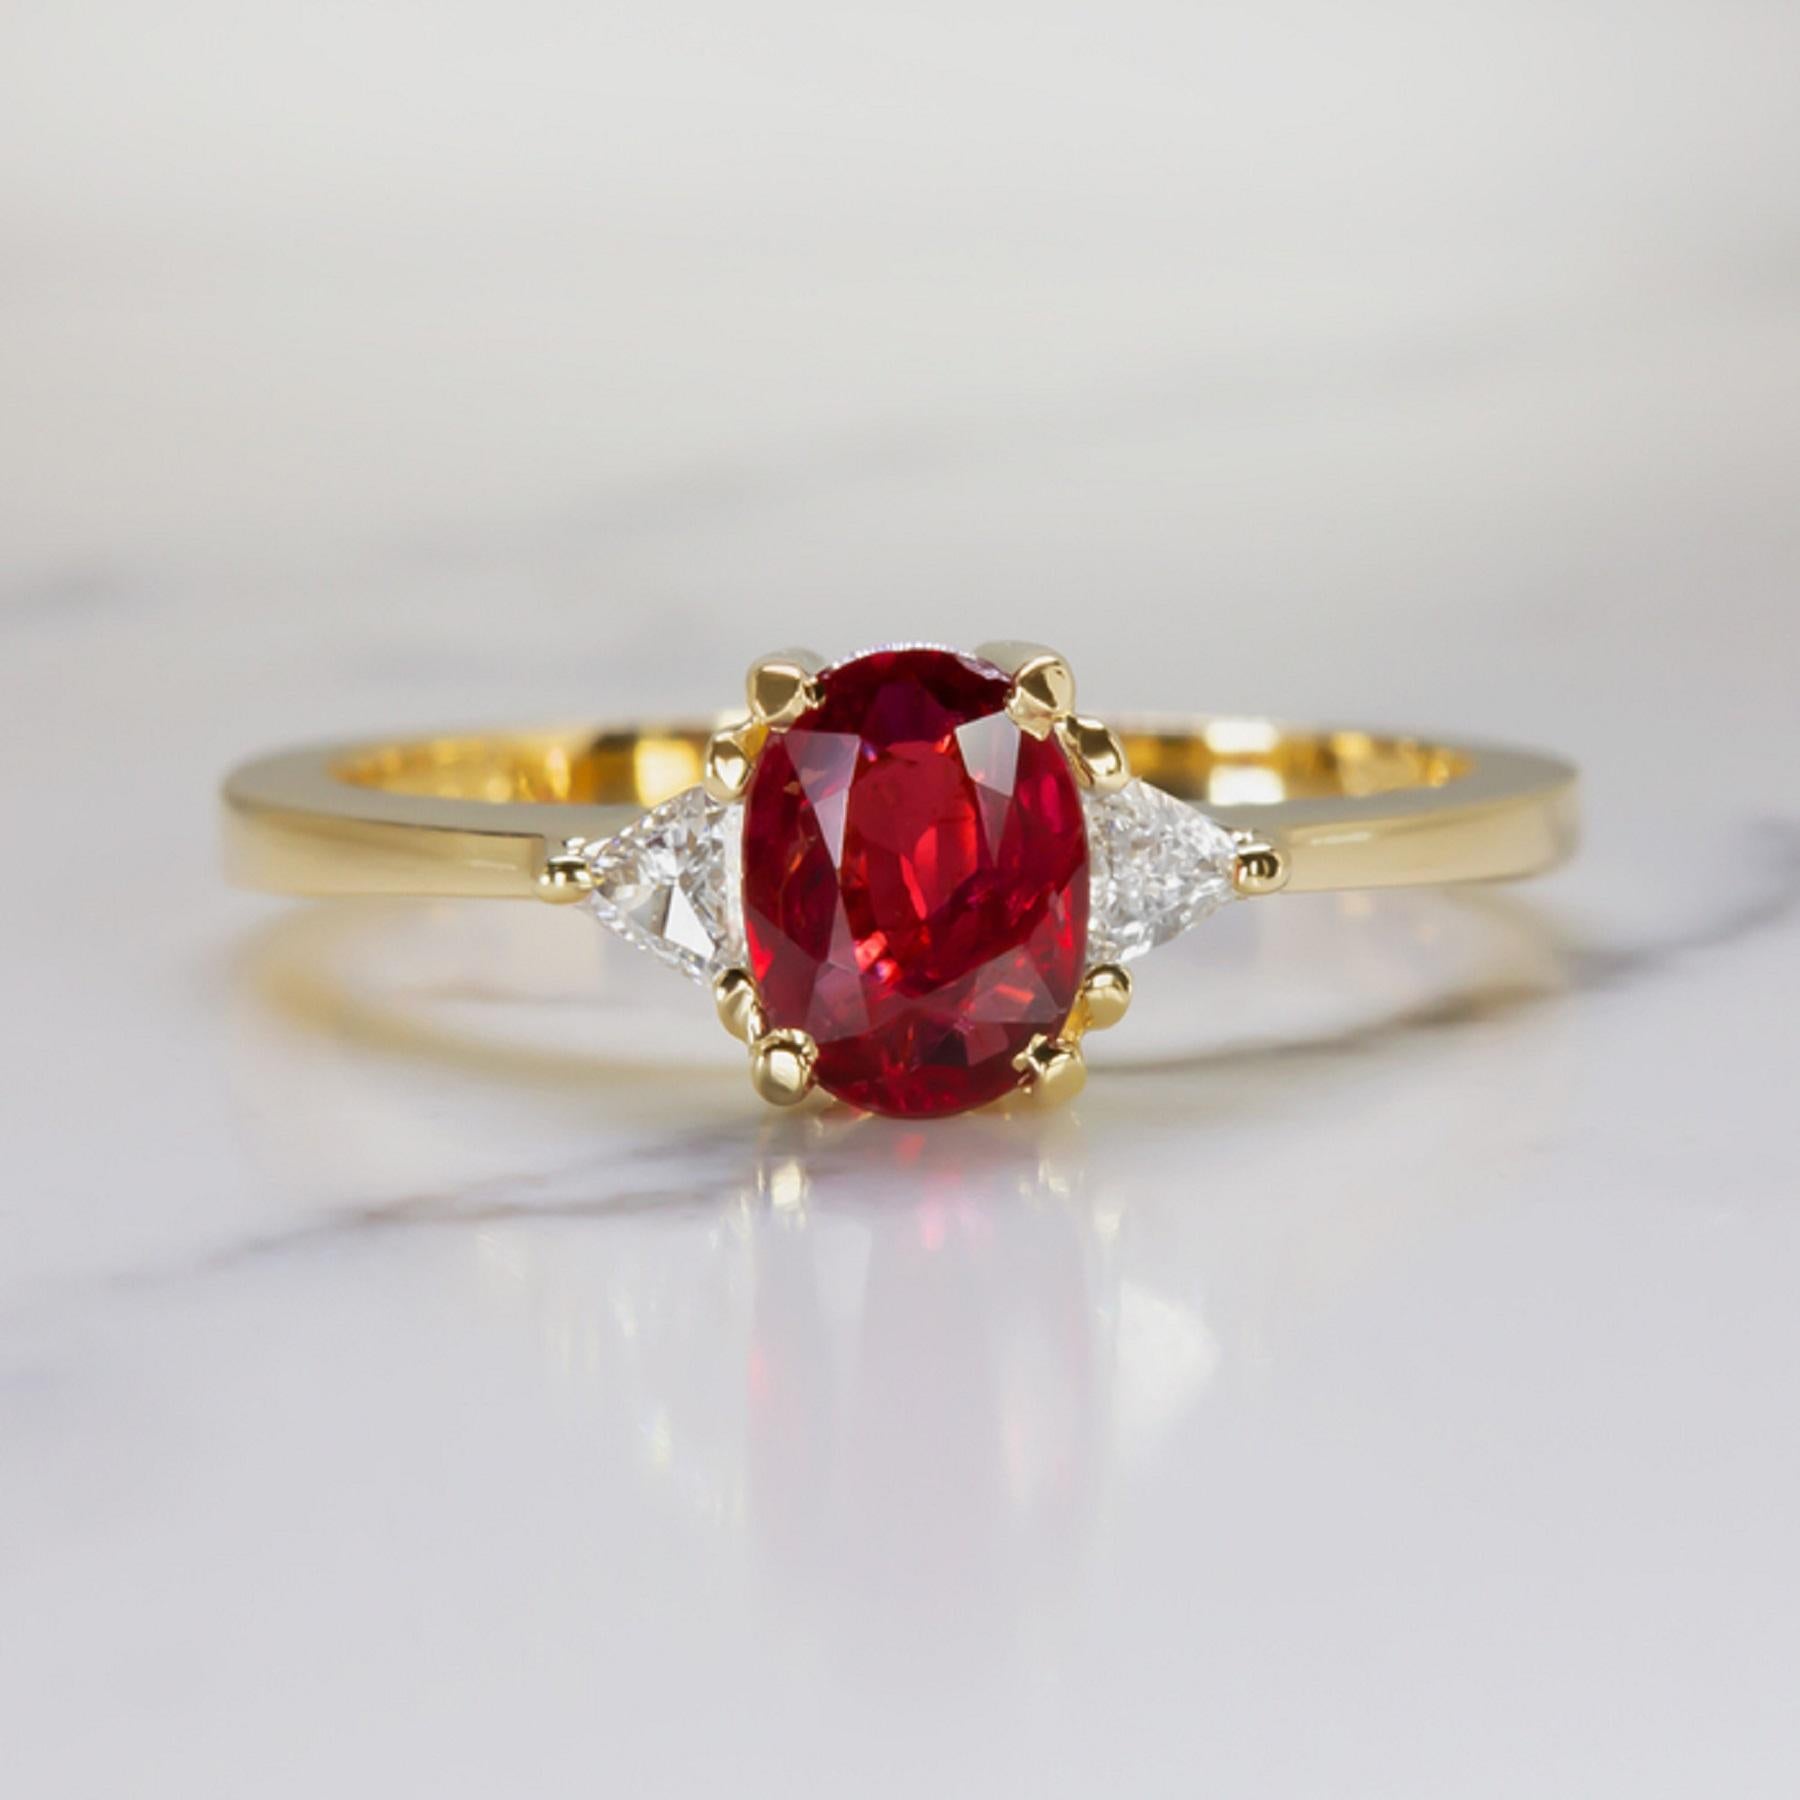 An exquisite rich color and bright sparkle, this elegant ring pairs a 0.82 carat unheated ruby with a pair of vibrant trillion cut diamonds. The 0.82 carat ruby is certified as unheated, and it is an absolutely stunning, even, and richly saturated